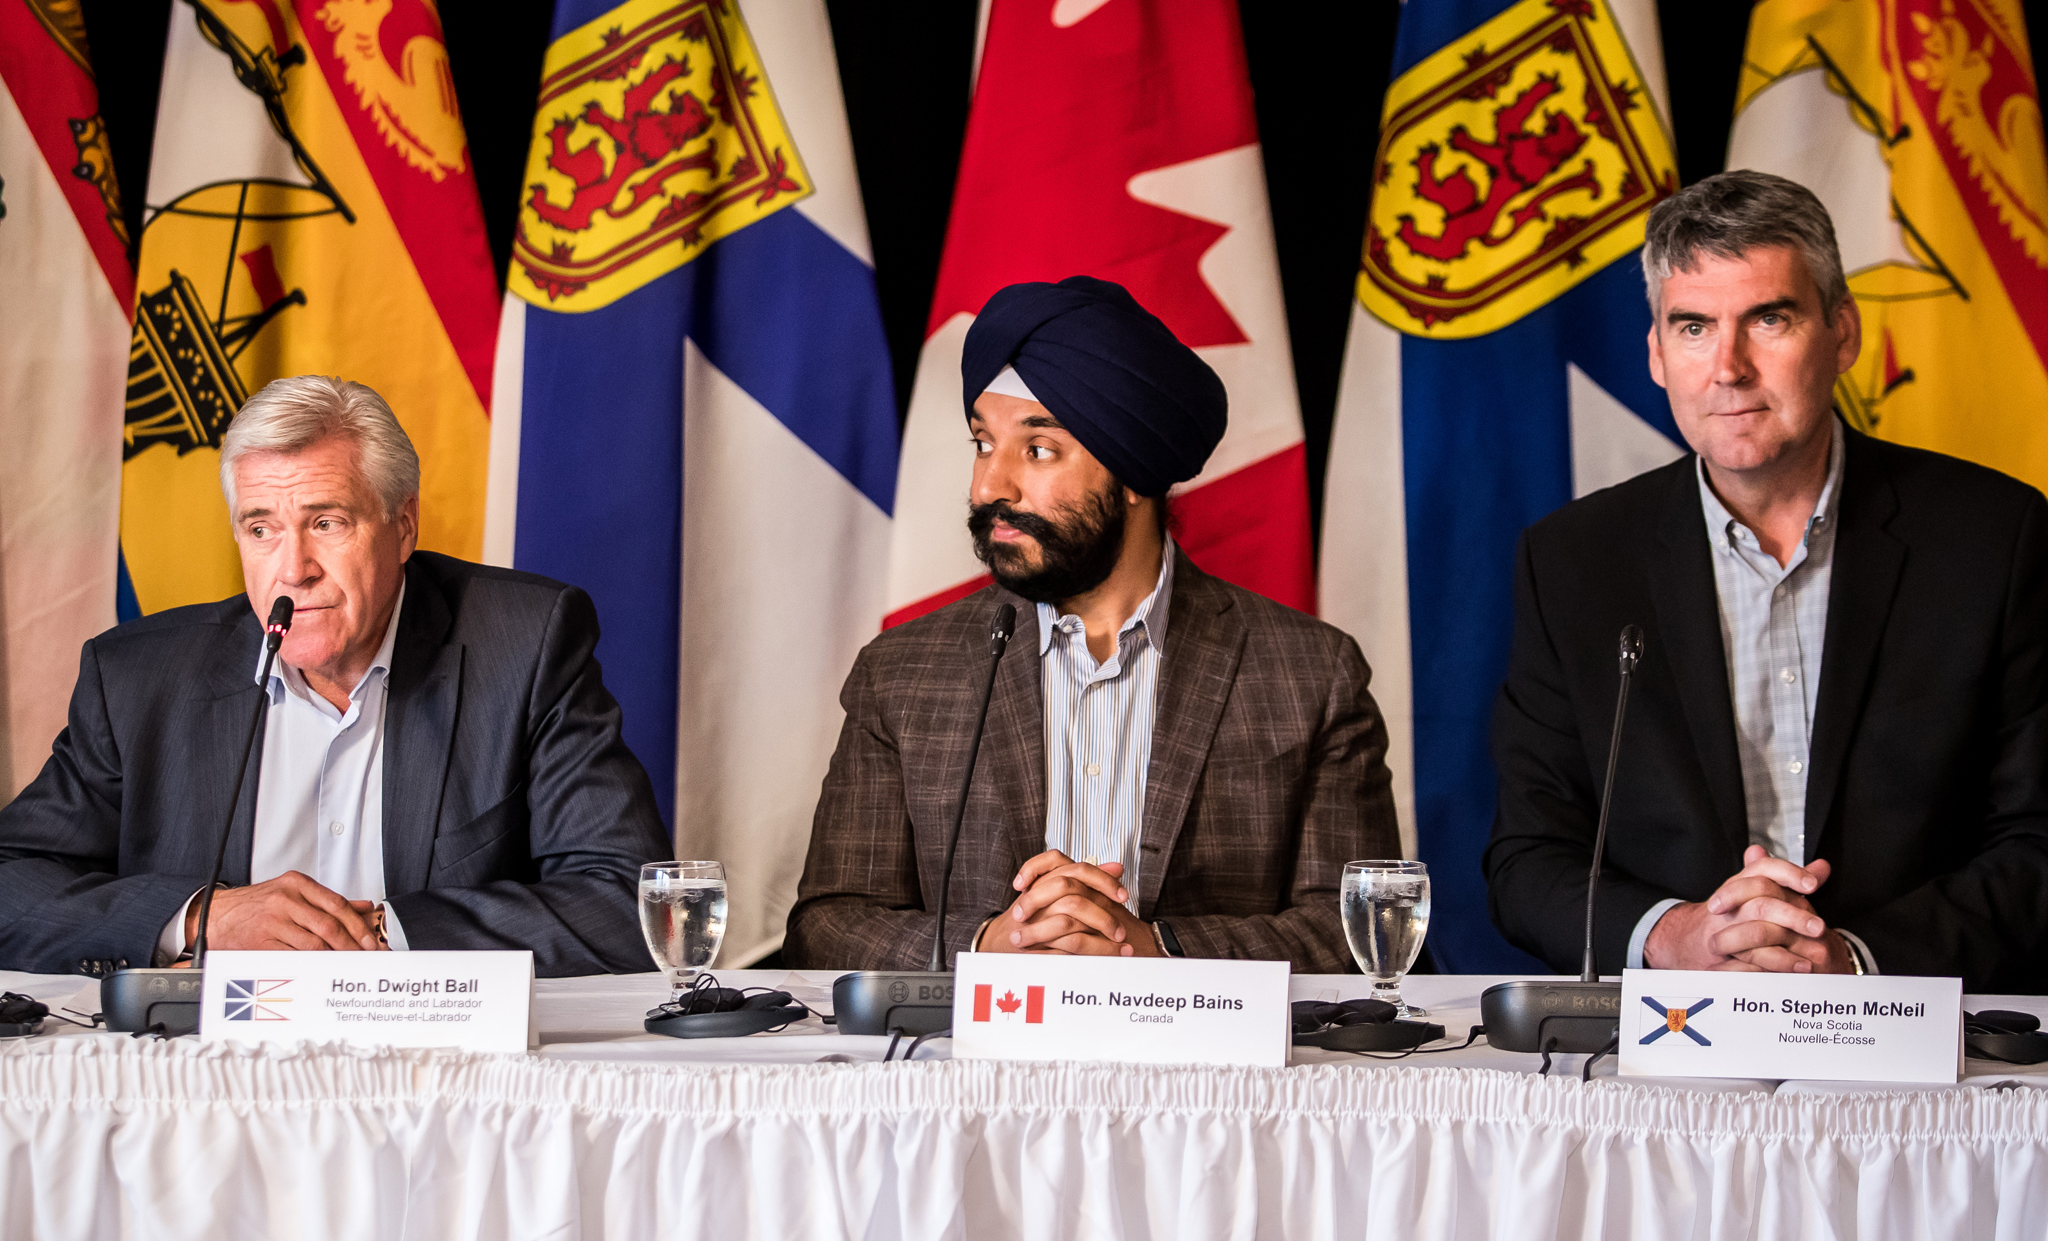 July 11, 2017 - Premier of Newfoundland and Labrador Dwight Ball, Minister of Innovation, Science and Economic Development and Minister responsible for ACOA Navdeep Bains, and Premier of Nova Scotia Stephen McNeil respond to media questions at the July 11, 2017, Atlantic Growth Strategy news conference in Humber Valley, NL.